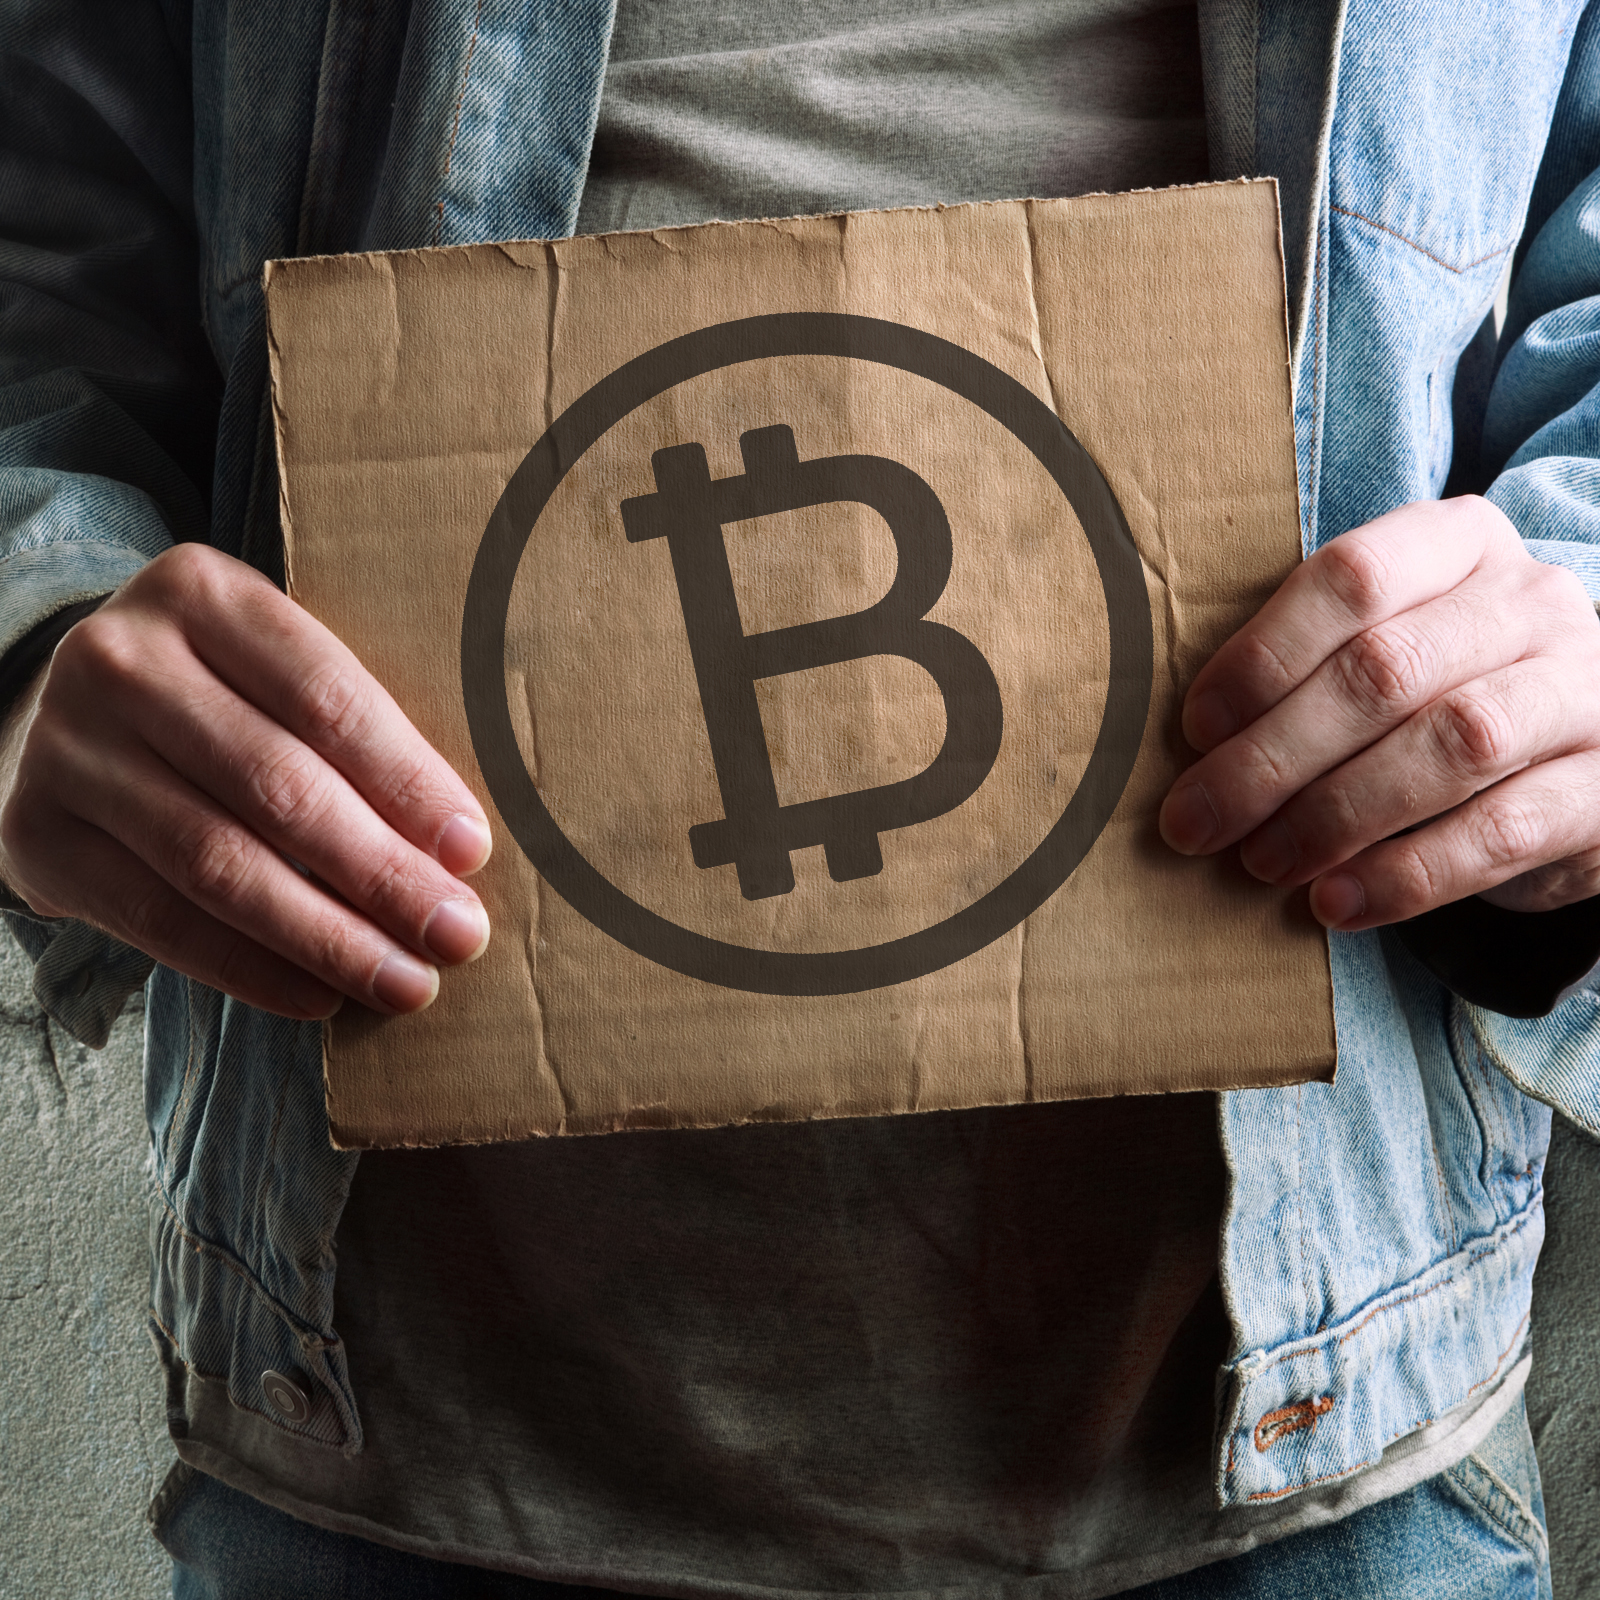 Toronto-Based Clothing Charity Relies Solely on Bitcoin Cash